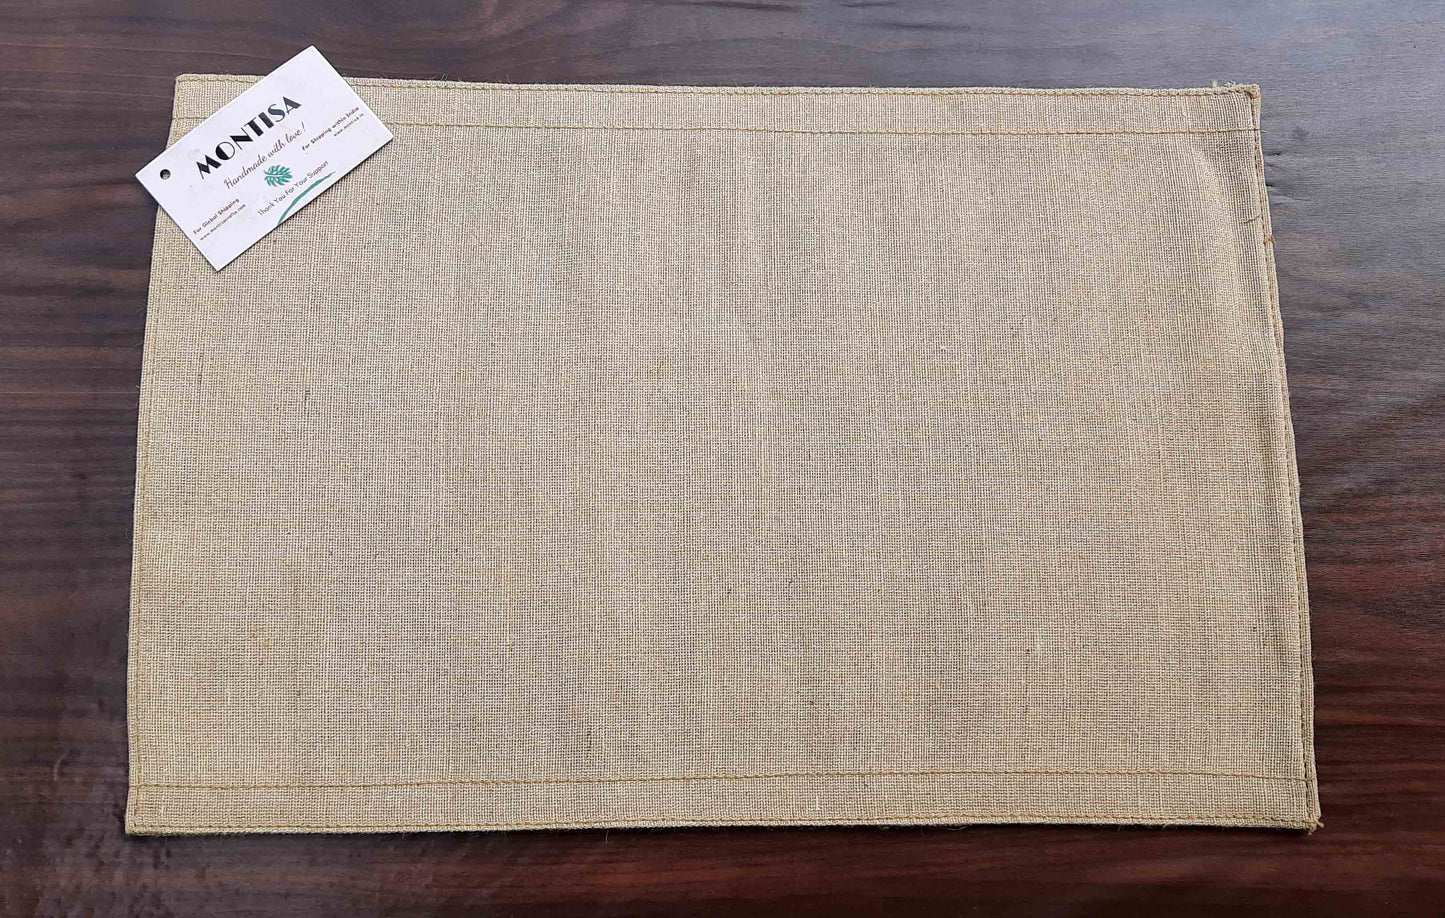 MONTISA Jute Table Mat Set (12×18 inches) with Runner Heat Resistant Eco-friendly Burpal Placemat (BTM-01